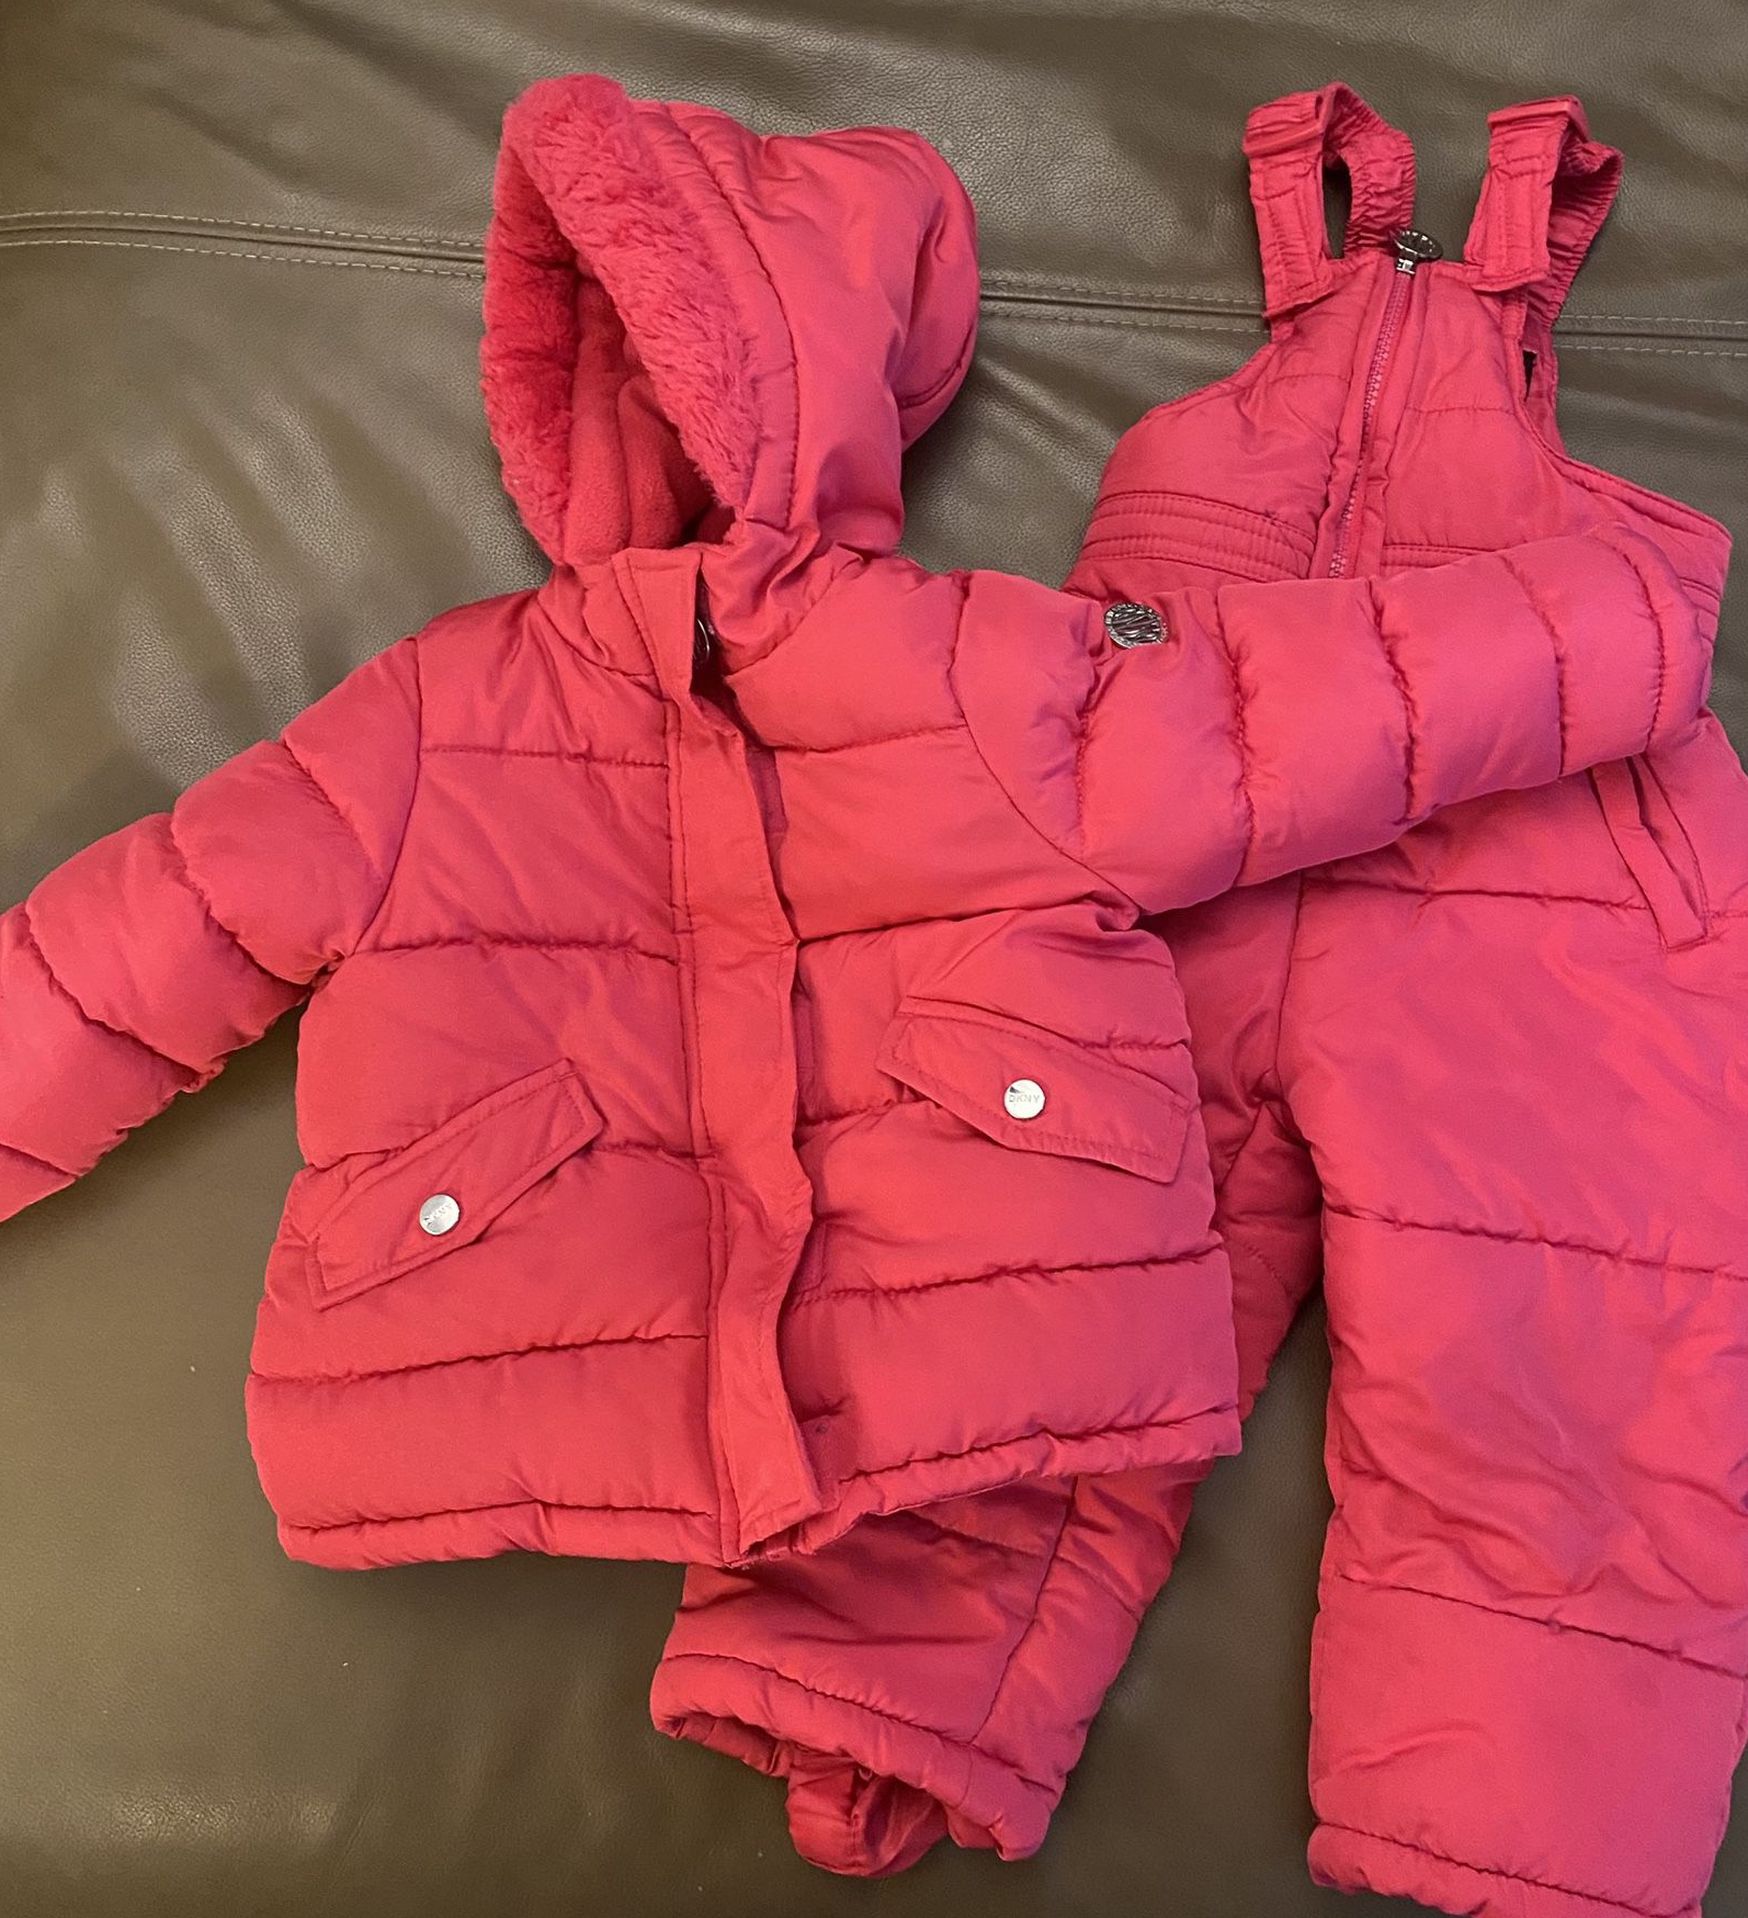 Winter Snow Baby Toddler Suit 2T